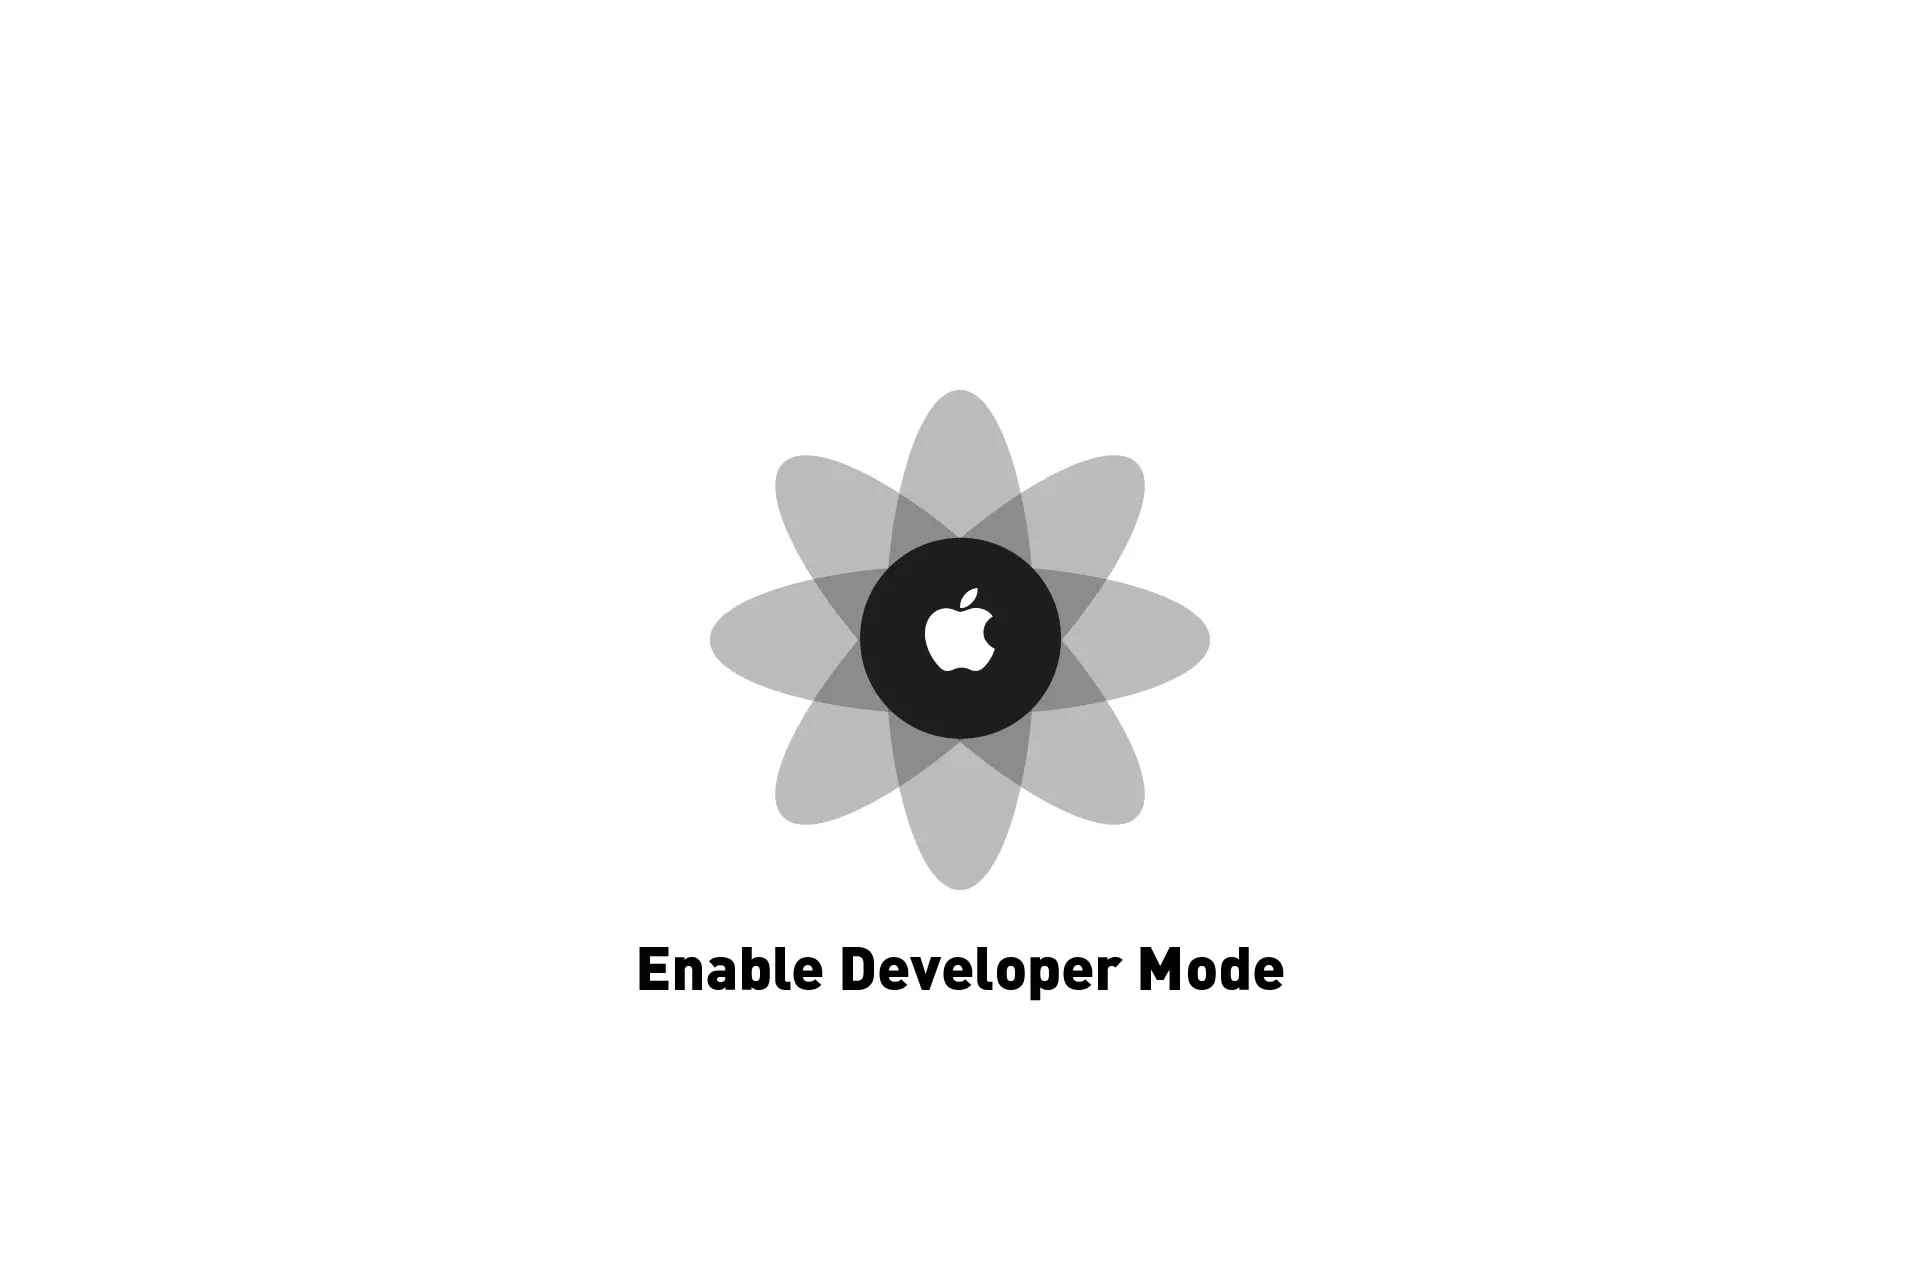 A flower that represents Apple with the text "Enable Developer Mode beneath it."